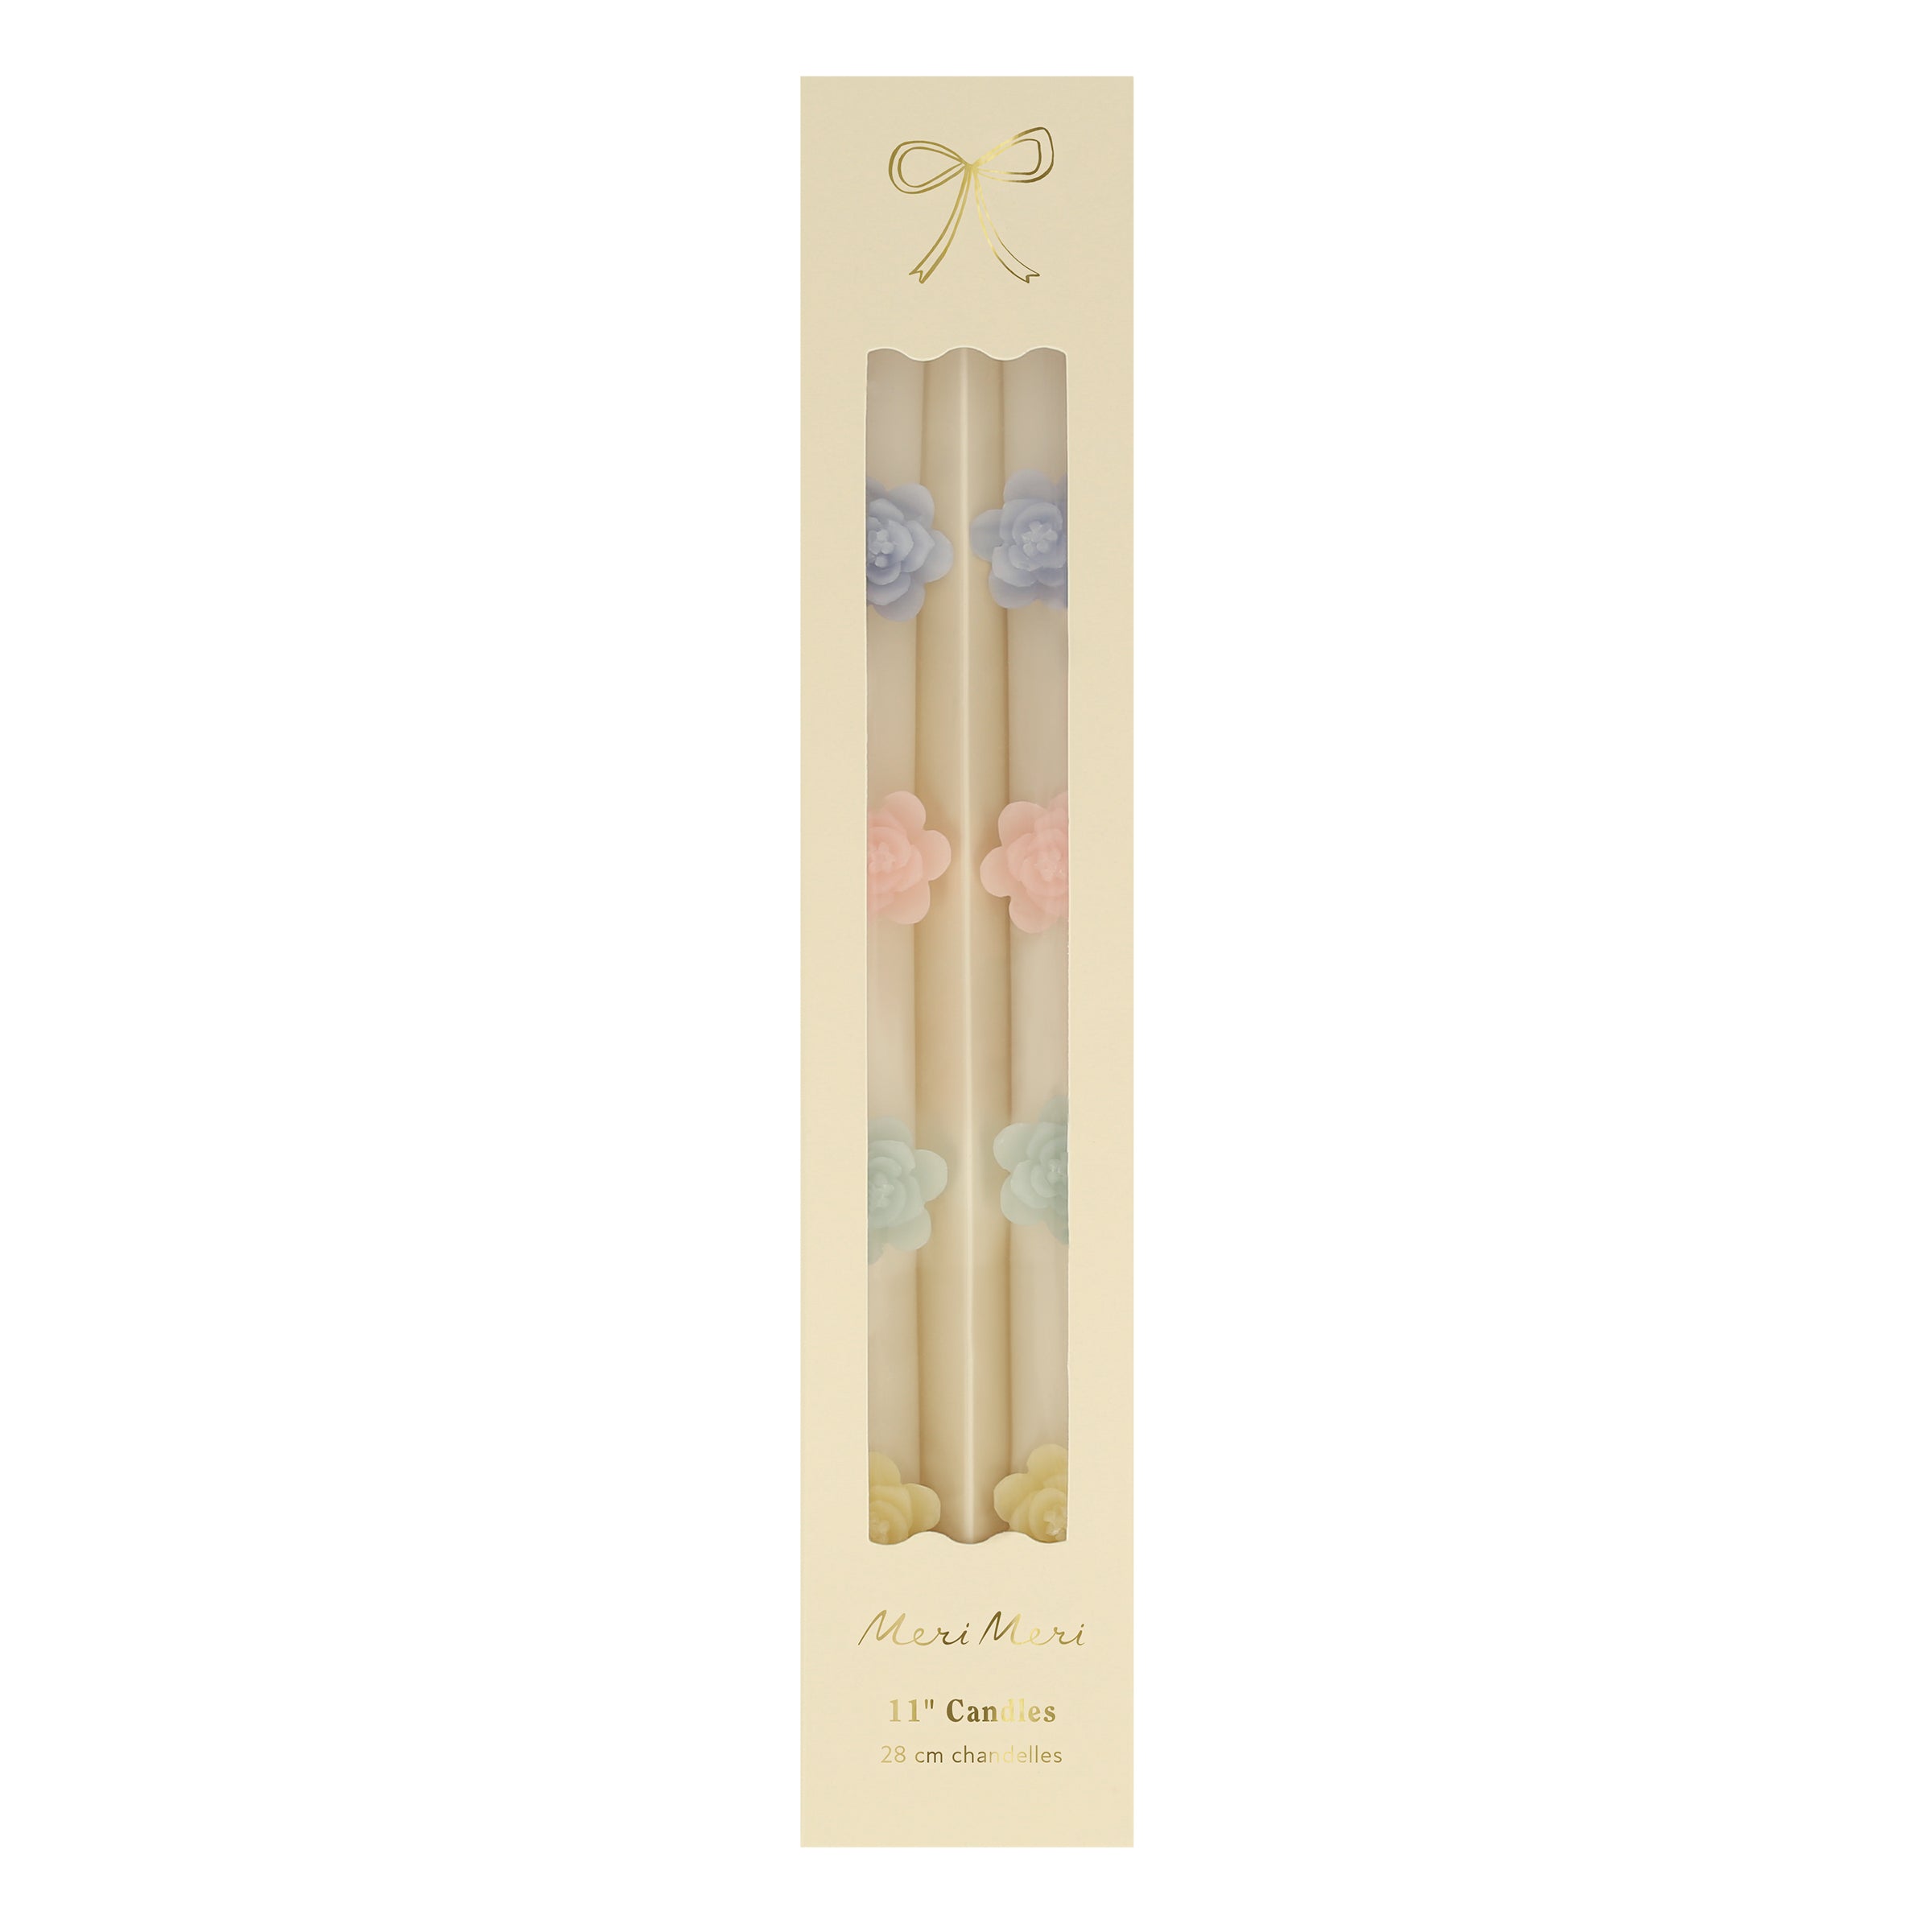 Our decorative candles are an elegant taper shape with 3D wax flowers.